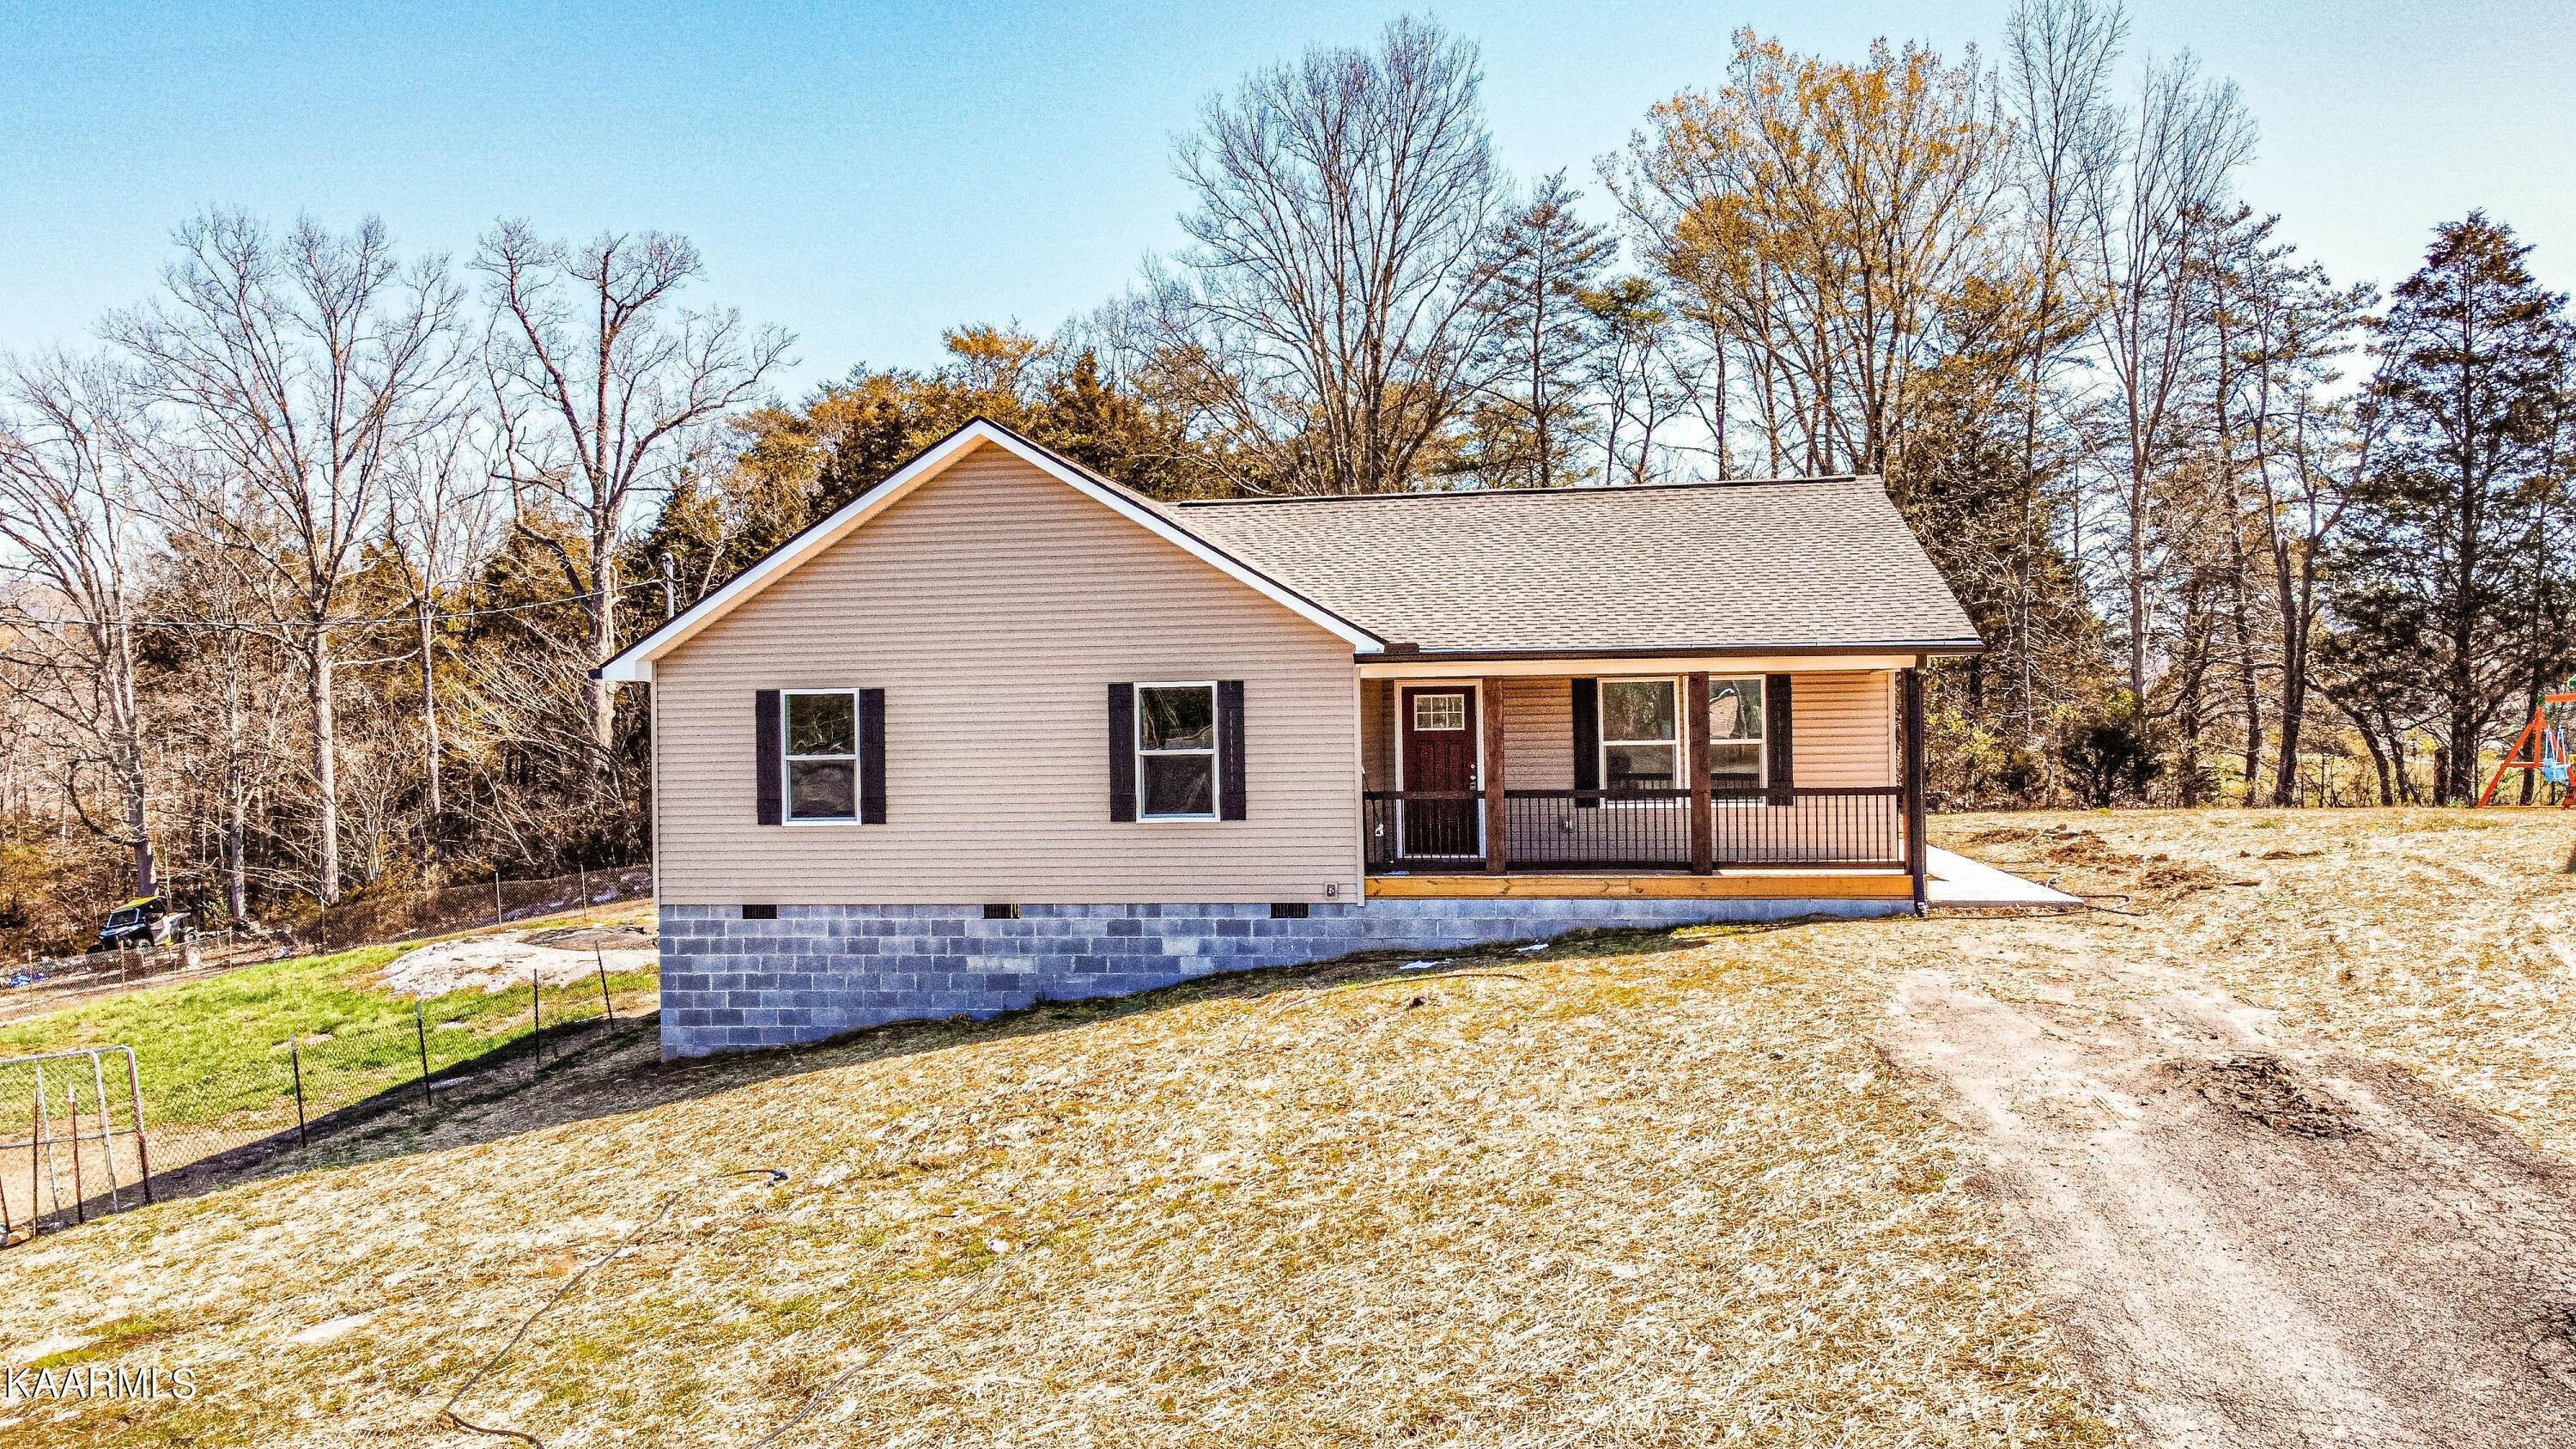 Single Family for Sale at Lafollette, TN 37766